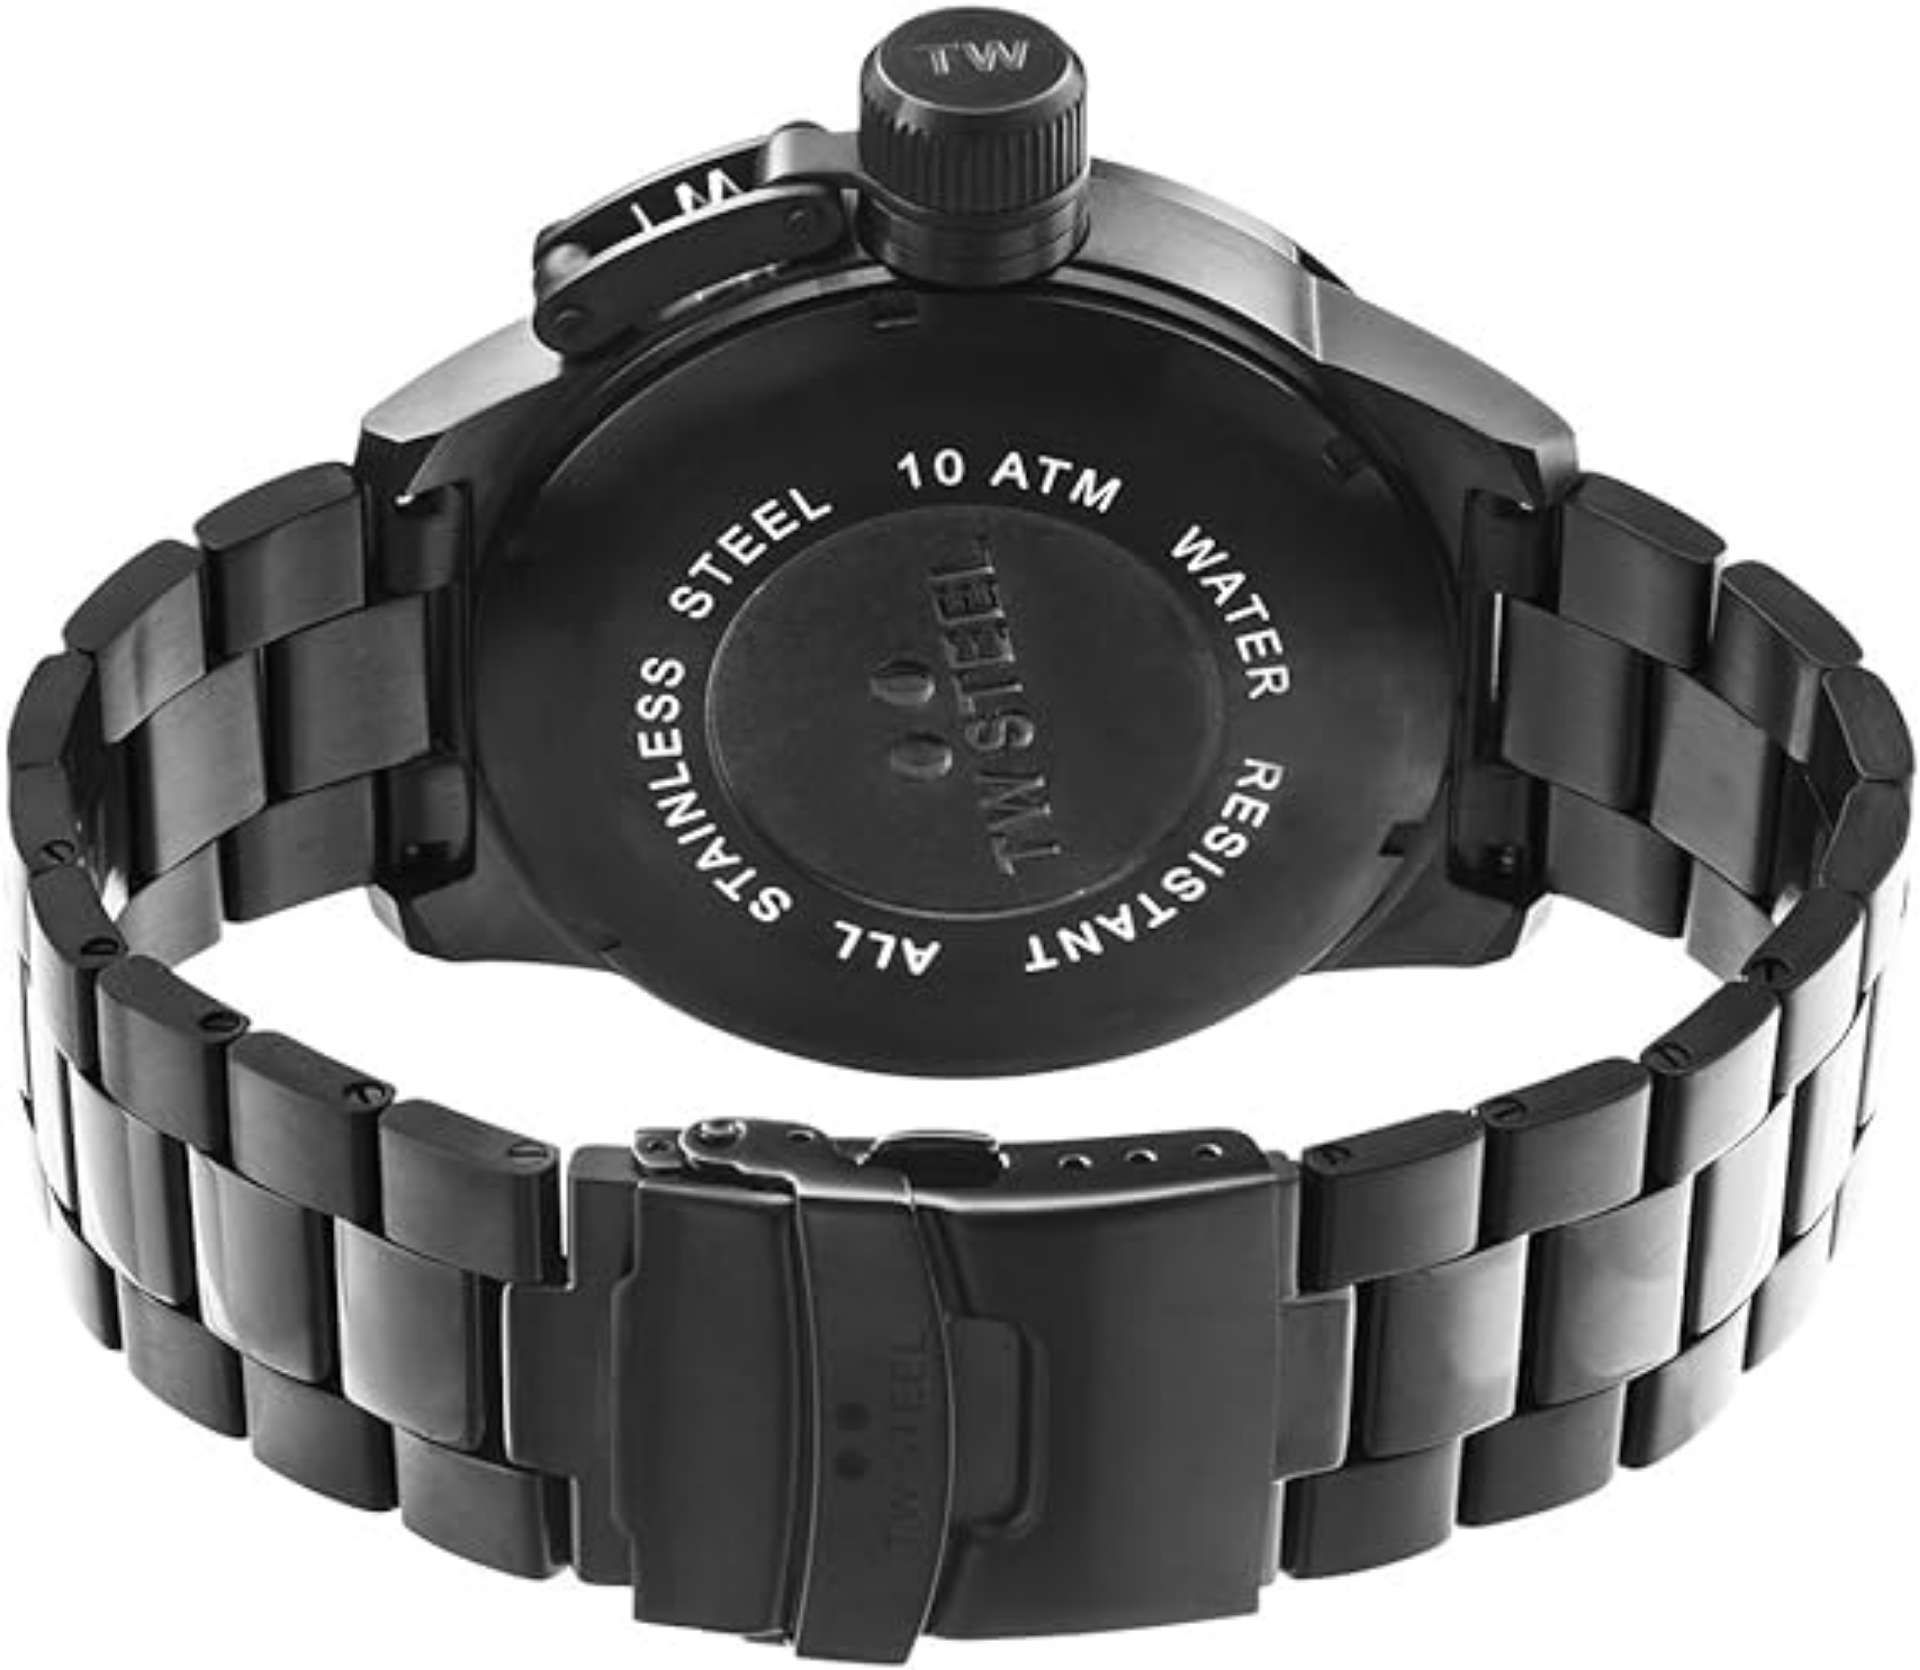 Brand NewTW Steel Men's Quartz Watch with Black Dial Analogue Display and Black Stainless Steel - Image 3 of 5